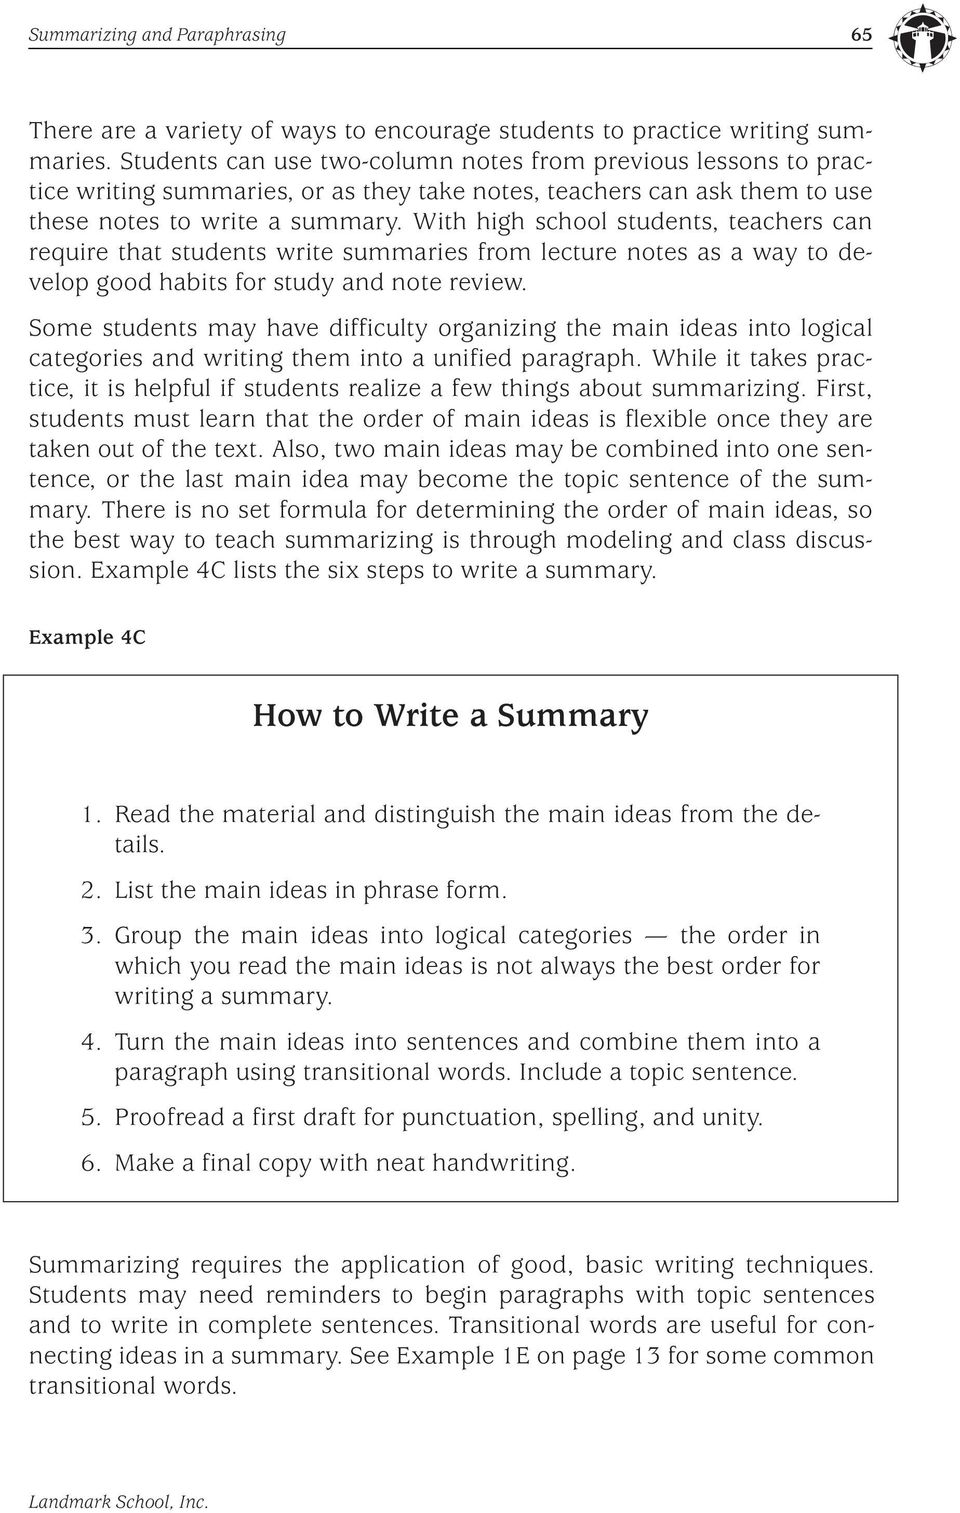 With high school students, teachers can require that students write summaries from lecture notes as a way to develop good habits for study and note review.